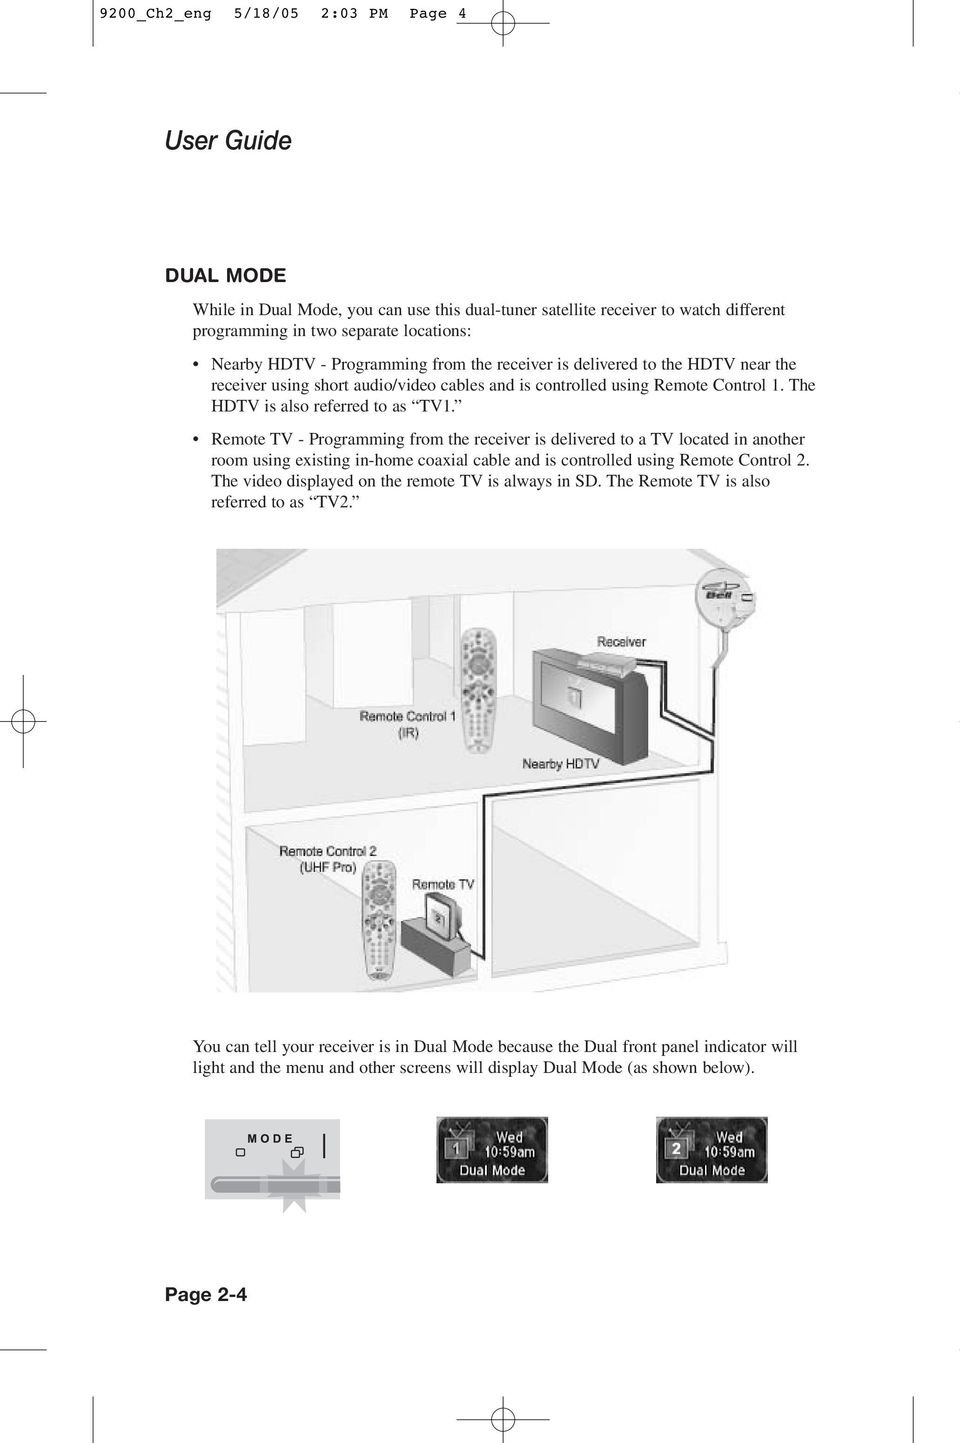 Remote TV - Programming from the receiver is delivered to a TV located in another room using existing in-home coaxial cable and is controlled using Remote Control 2.